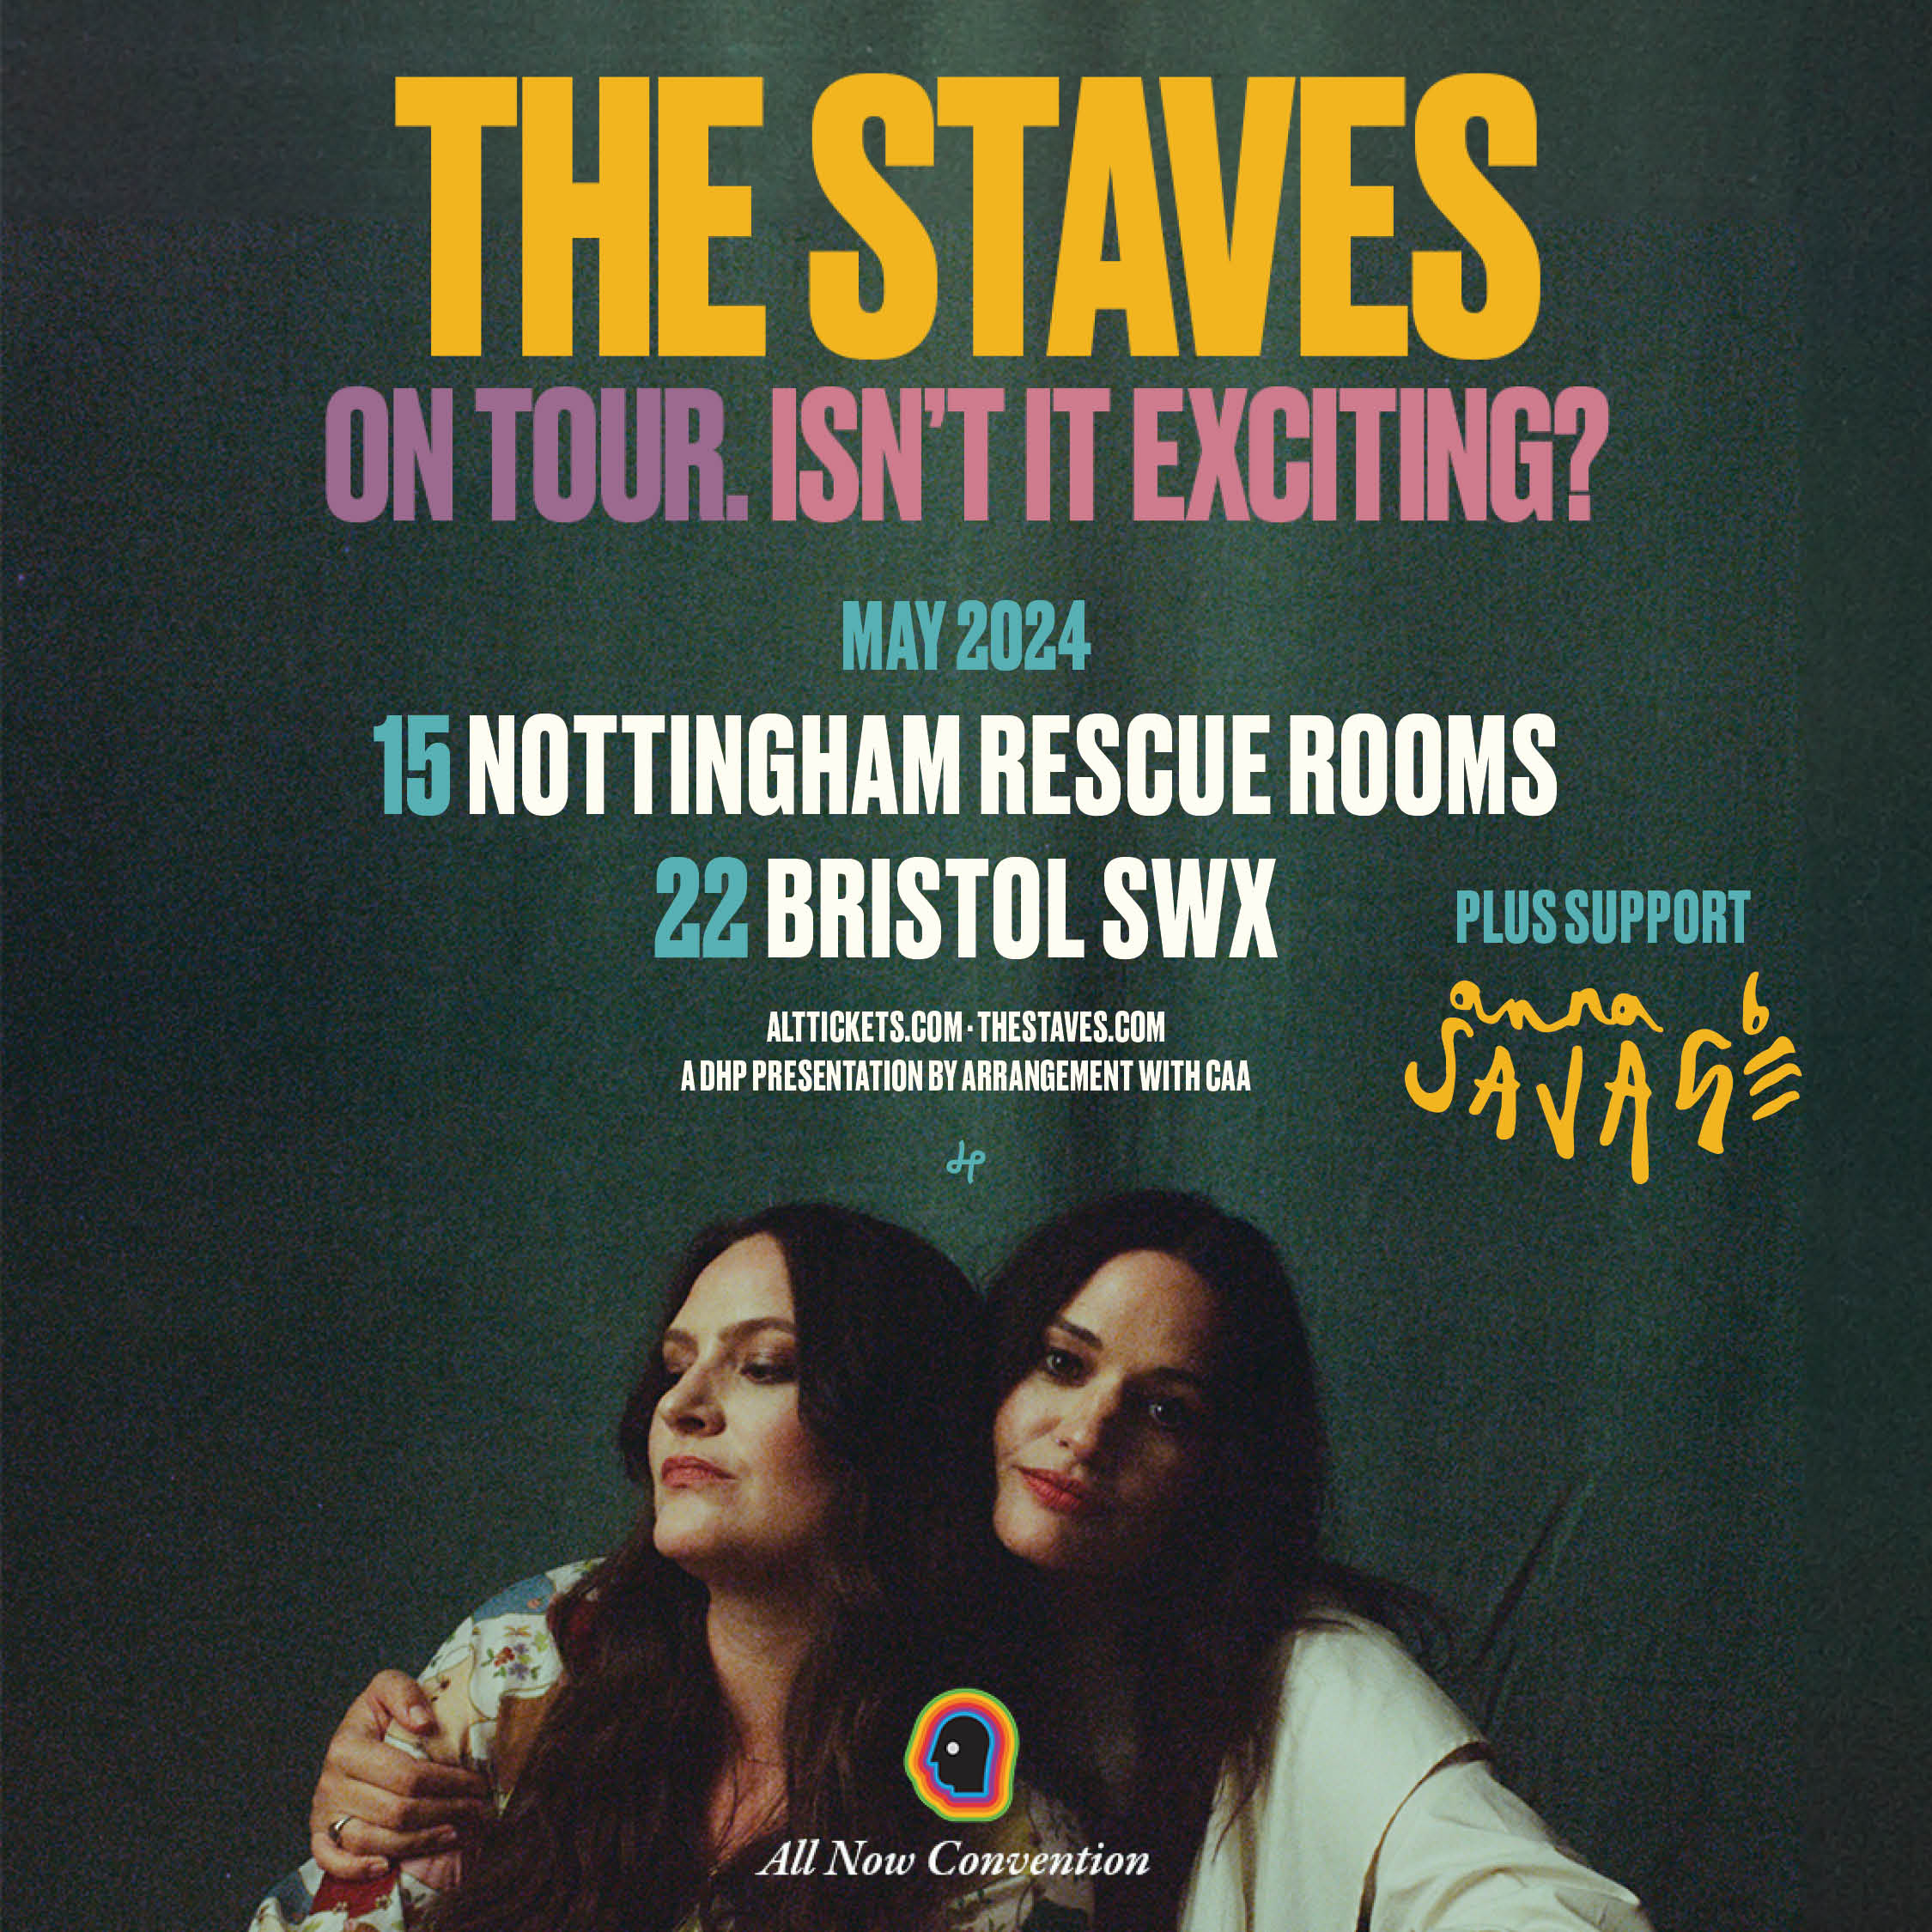 THE STAVES POSTER